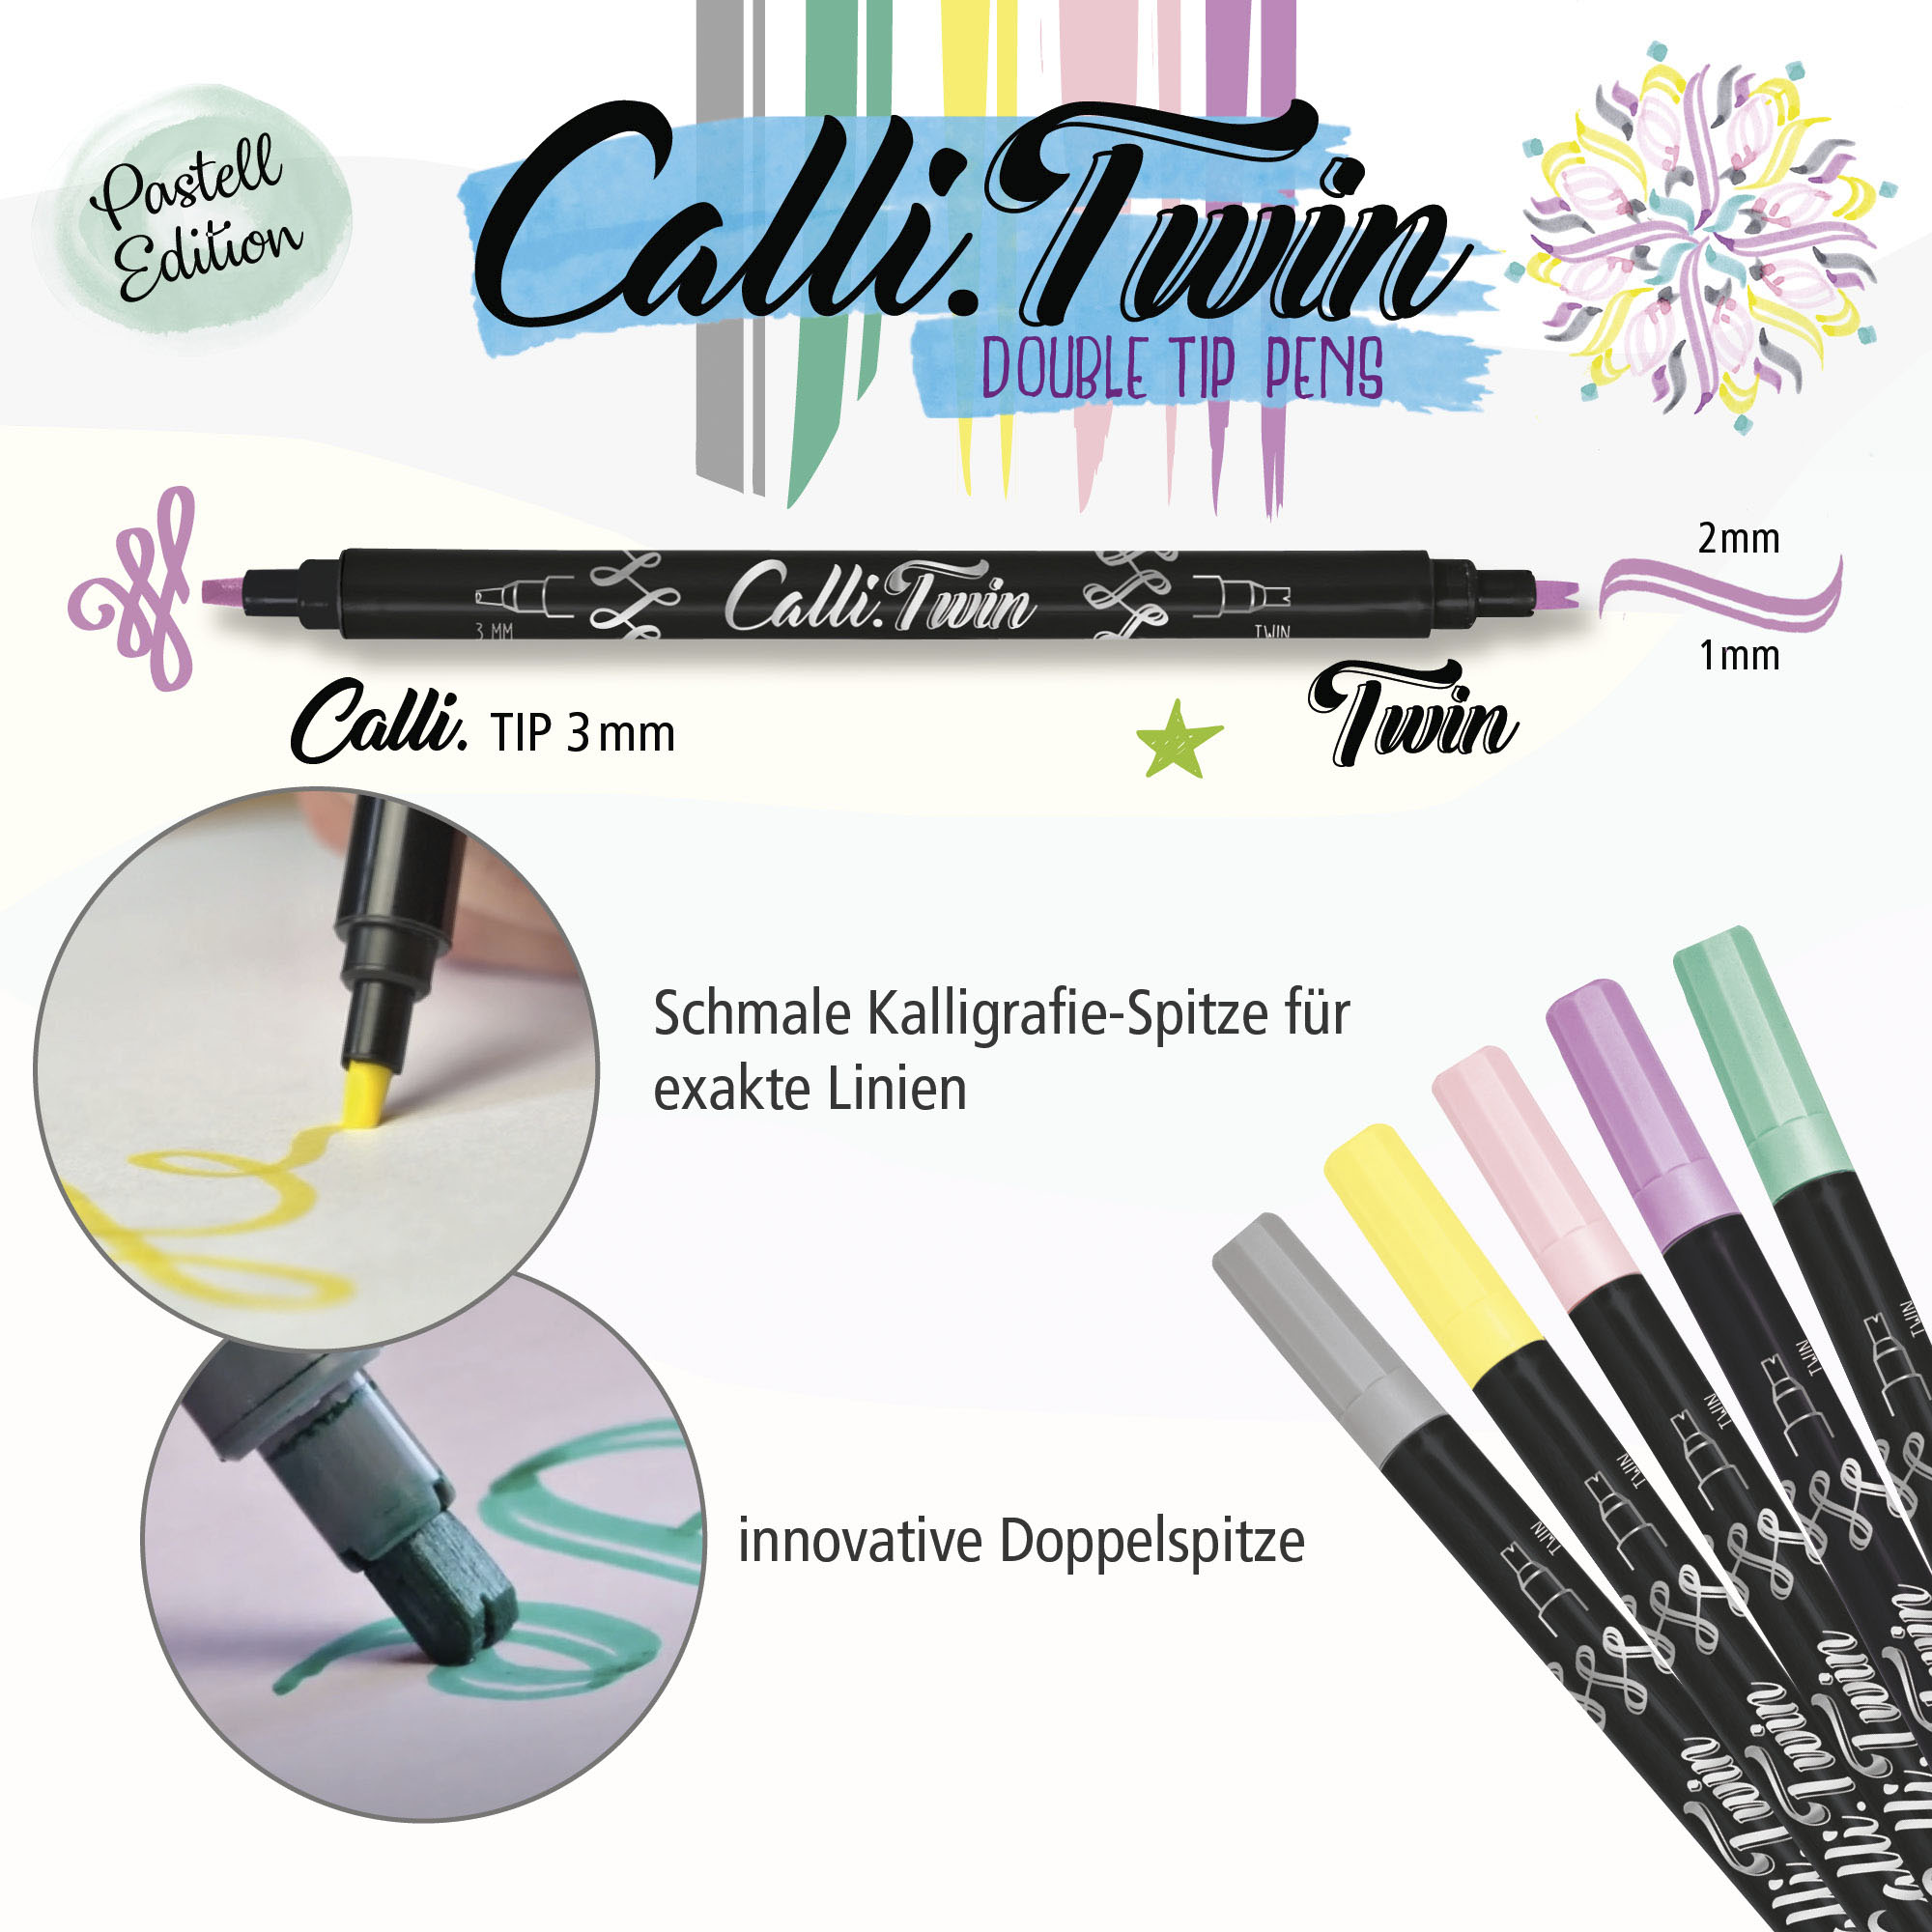 Calli.Twin double tip pens Pastel Edition